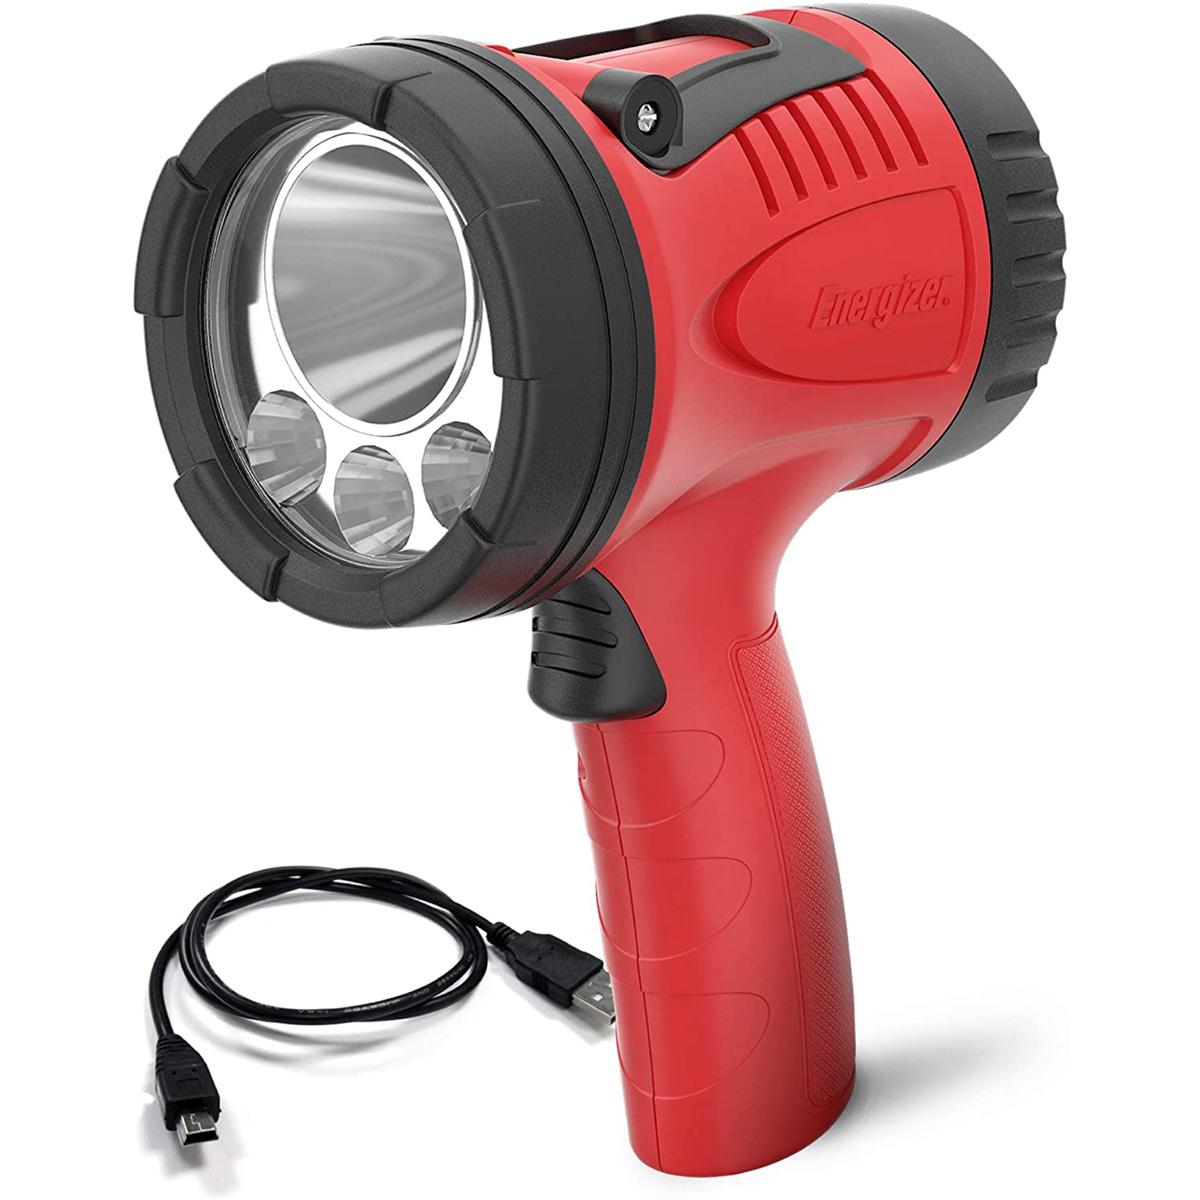 Energizer 600 Lumens LED Portable Rechargeable Spotlight for $19.91